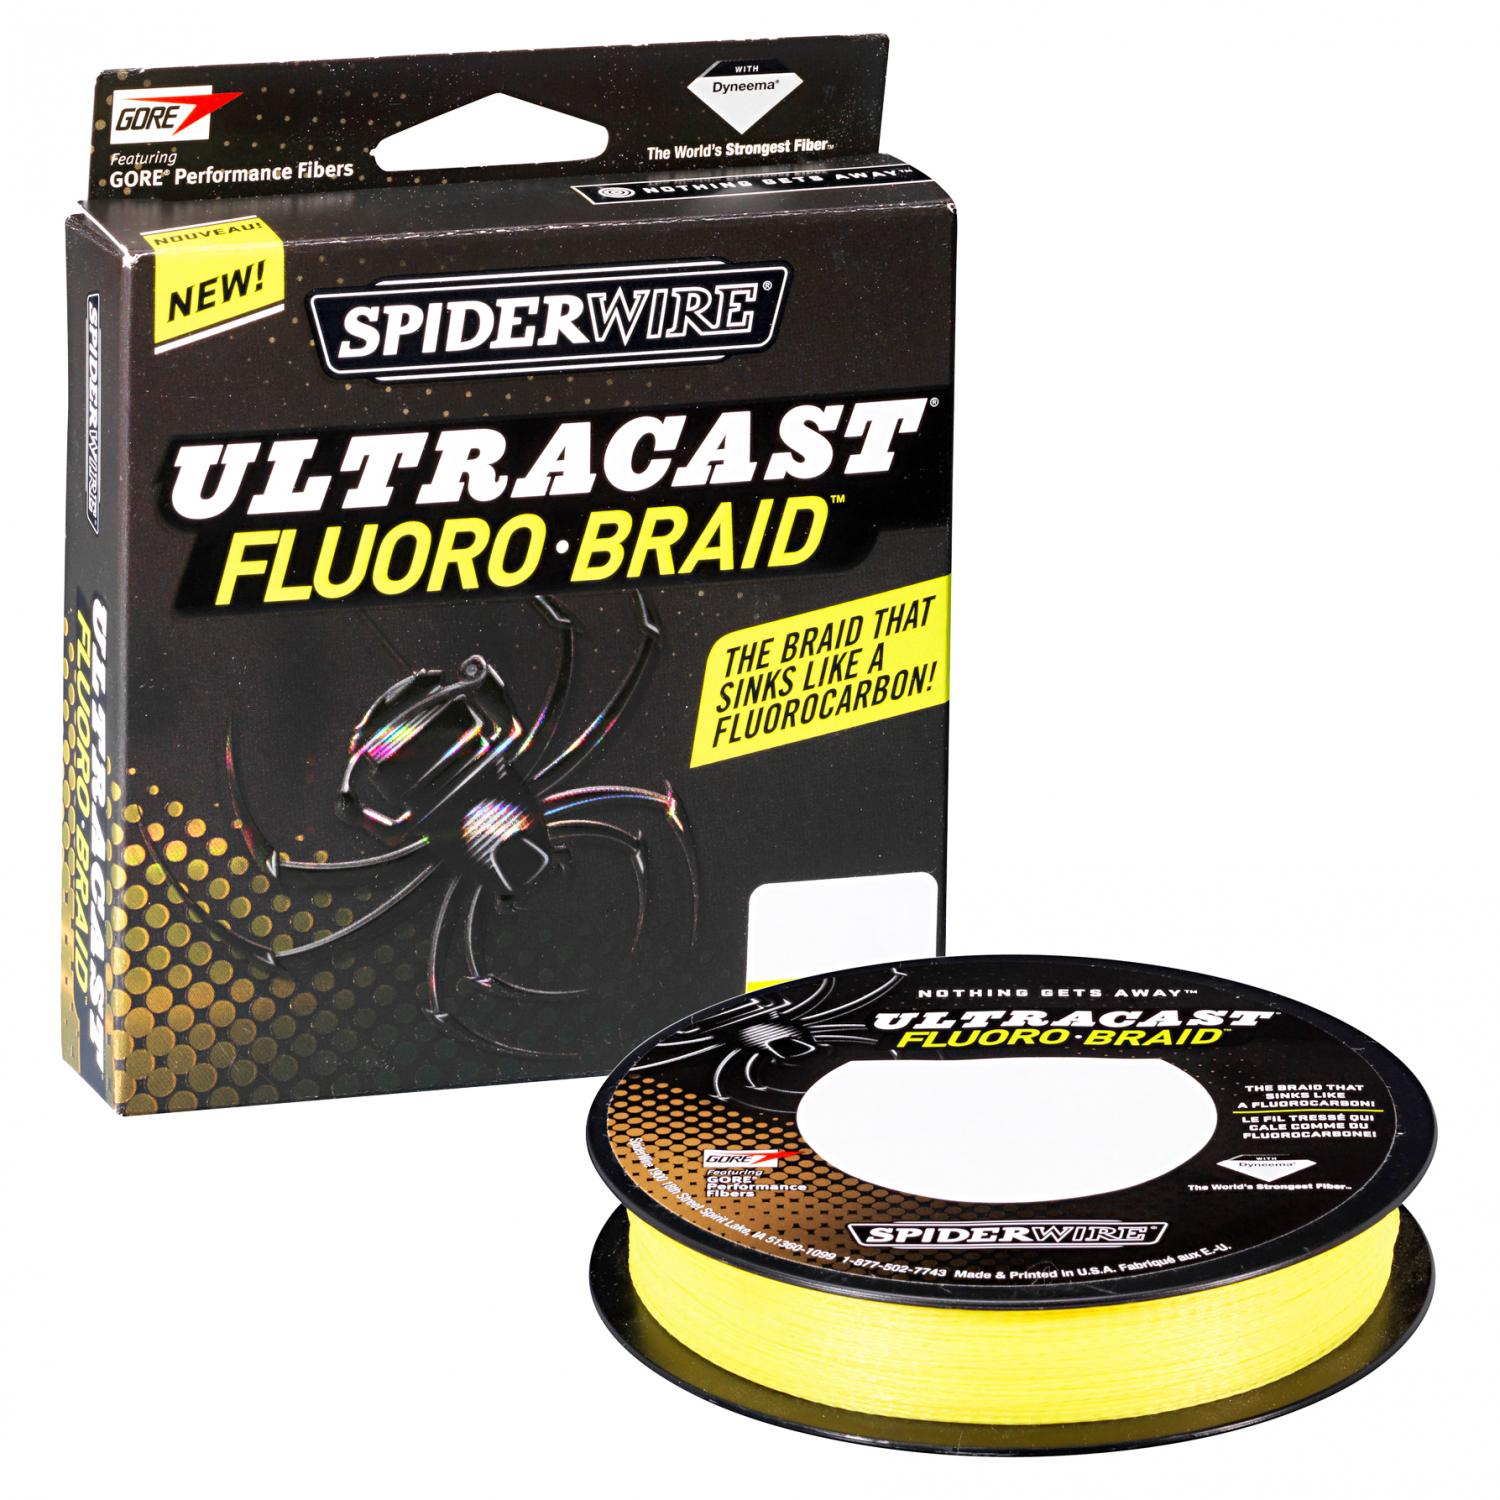 Spiderwire Fishing Line Ultracast Fluorobraid (Yellow) at low prices